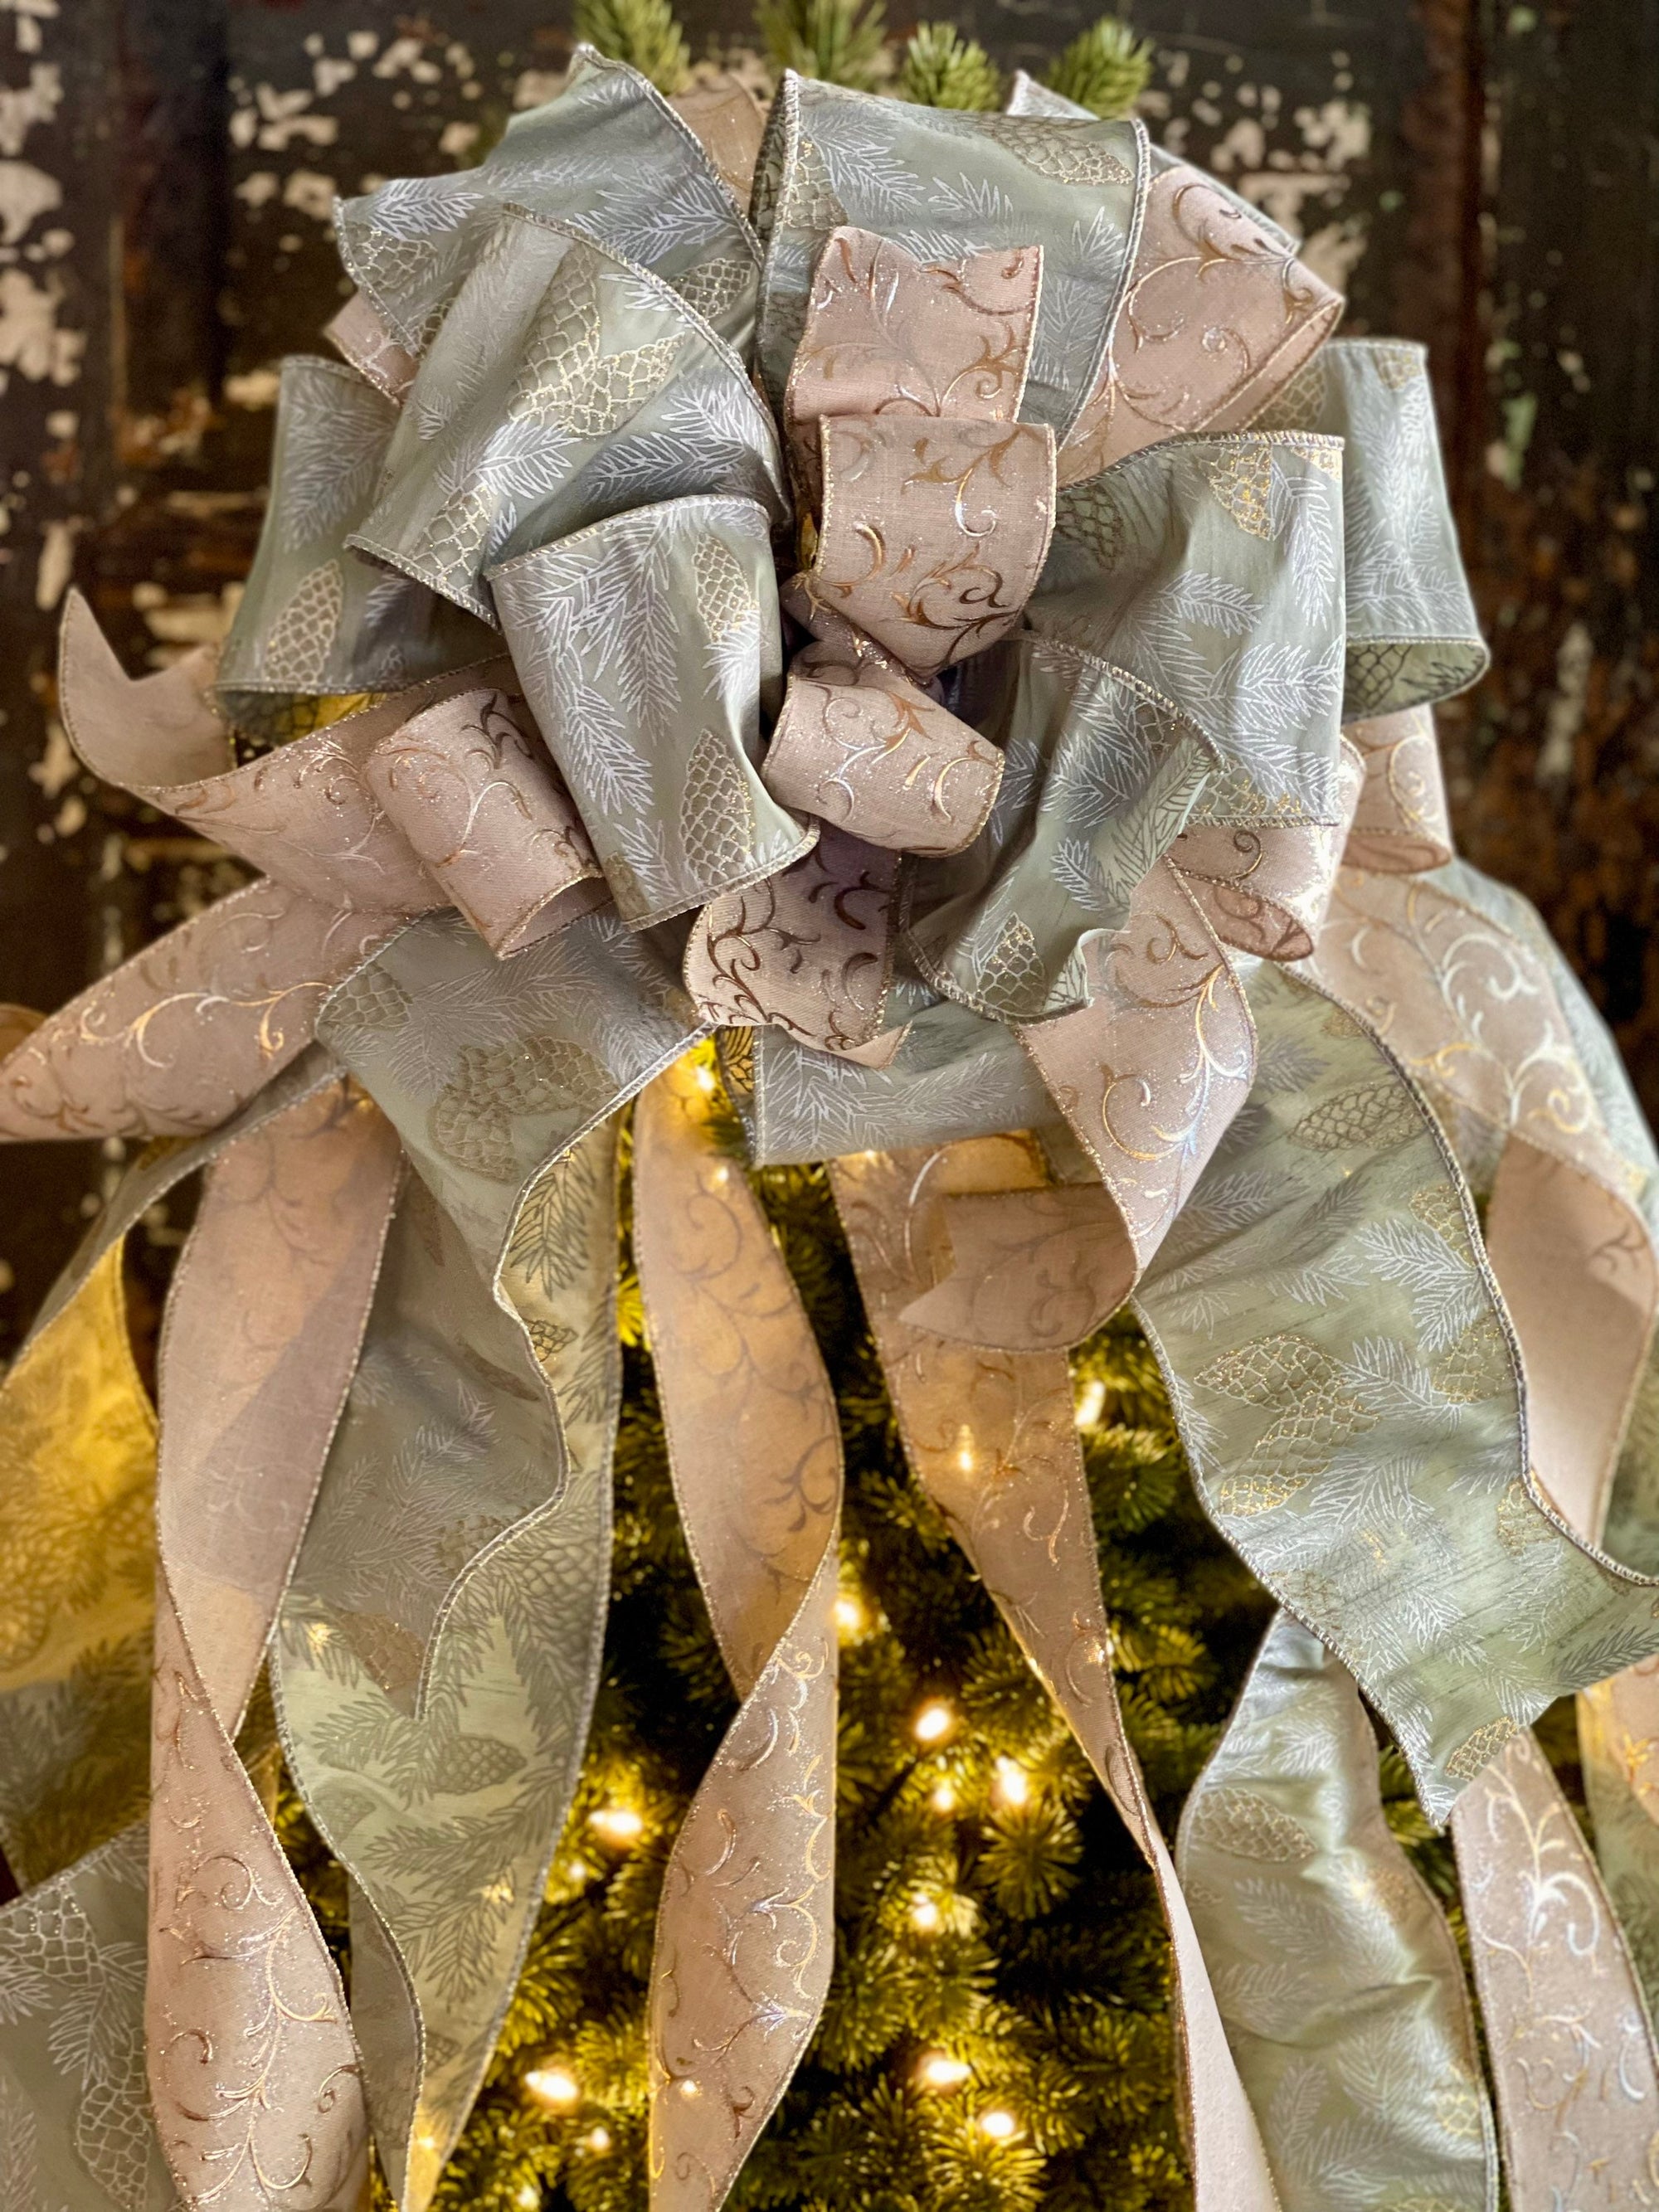 The Midori Minty Sage Green Gold & Silver Christmas Tree Topper